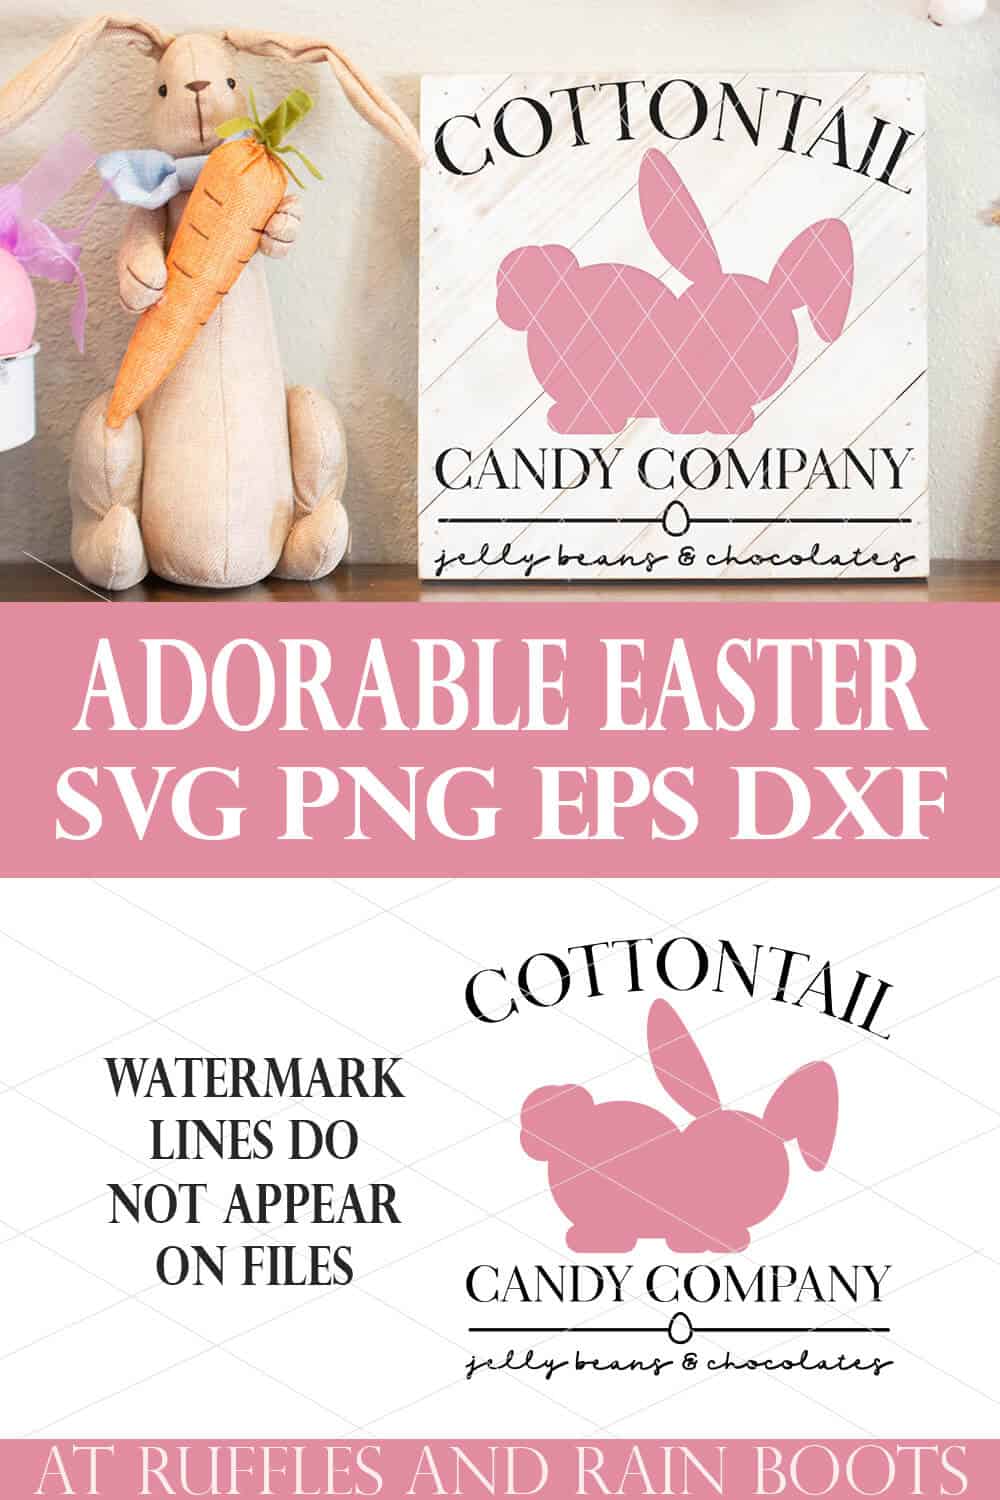 Vertical stacked image of a free Easter SVG Cottontail Candy Company on wood sign next to stuffed vintage bunny with text which reads adorable free Easter SVG.